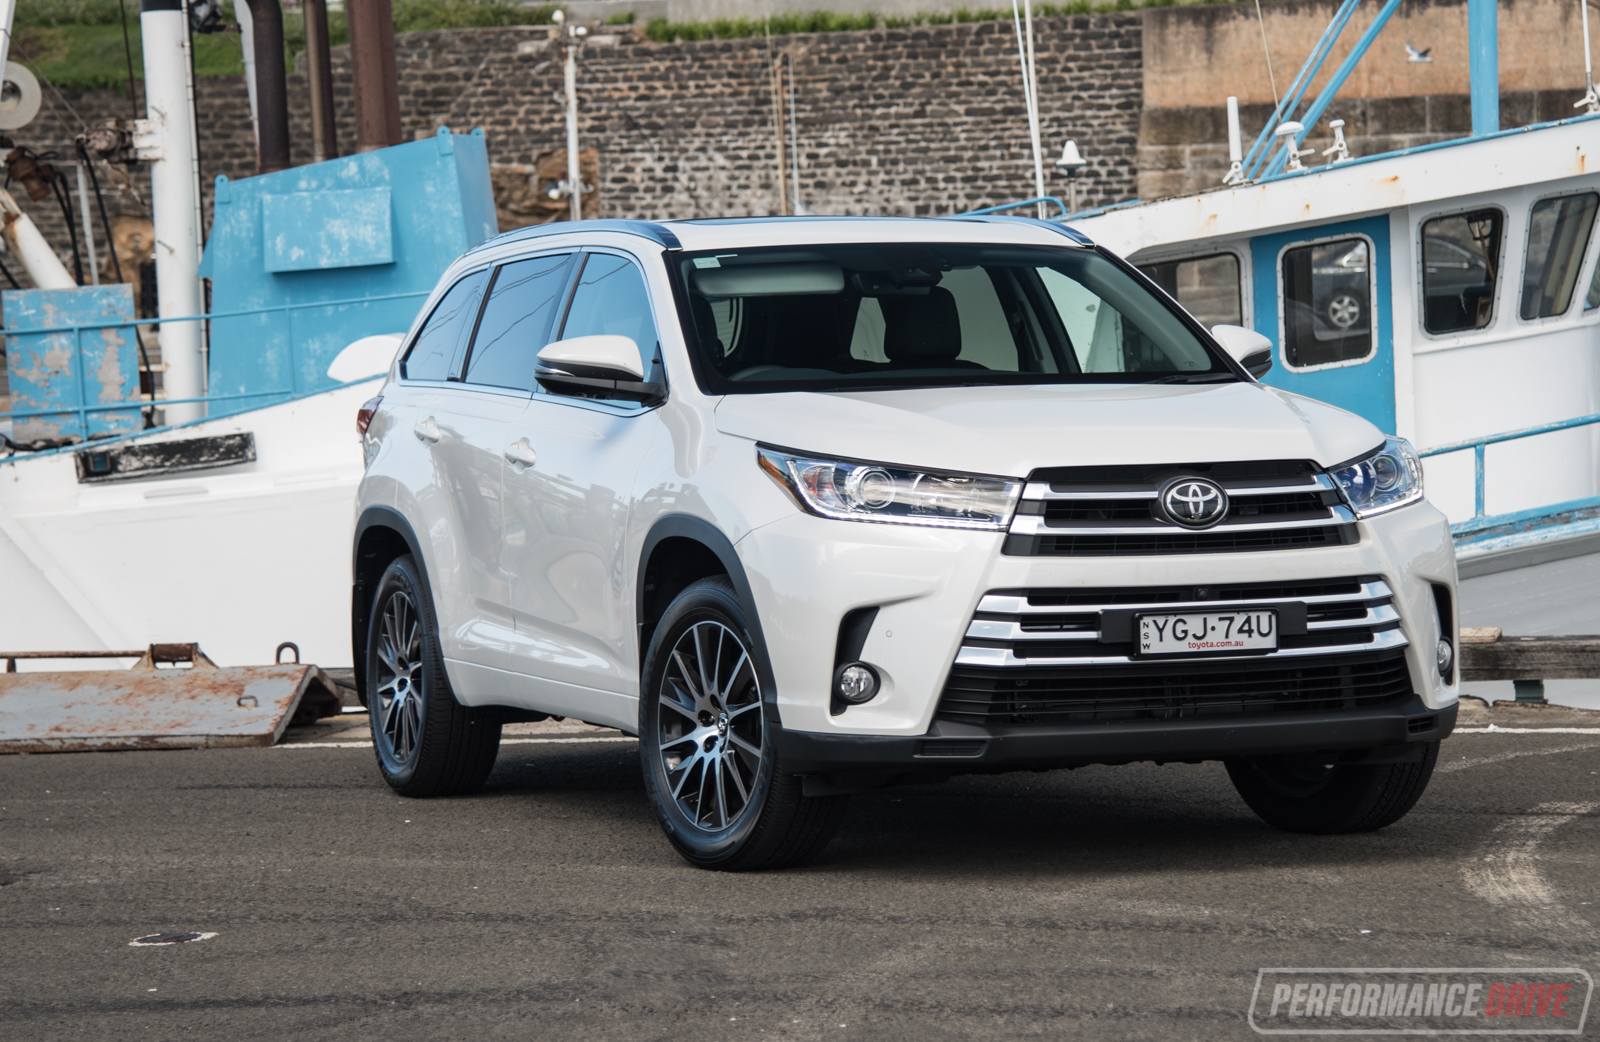 2017 Toyota Kluger Grande AWD review (video)